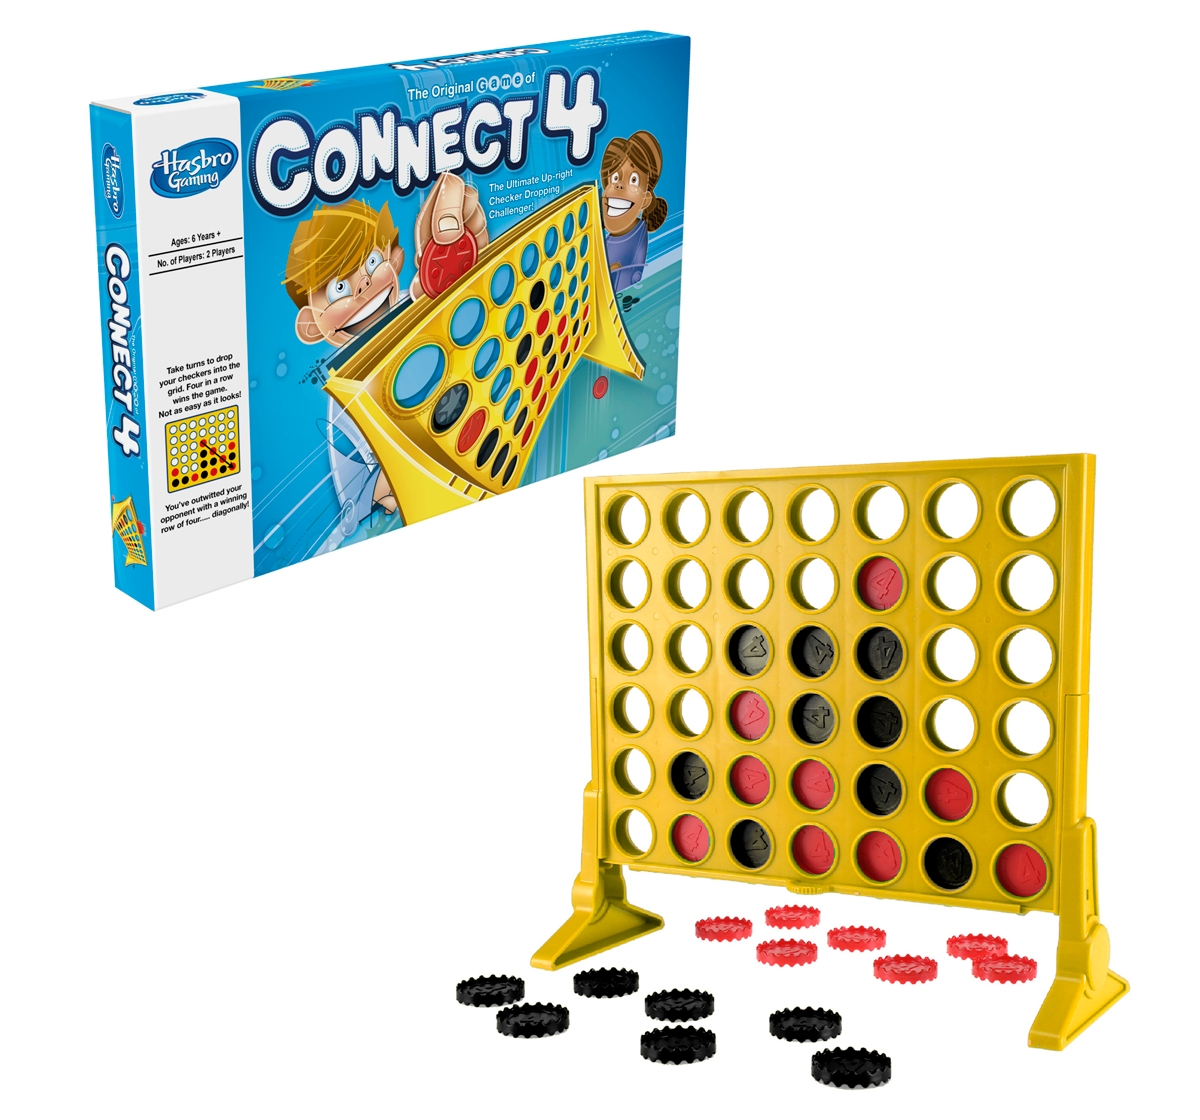 Hasbro Gaming Connect 4 Shots Board Games for Kids 6Y+, Multicolour